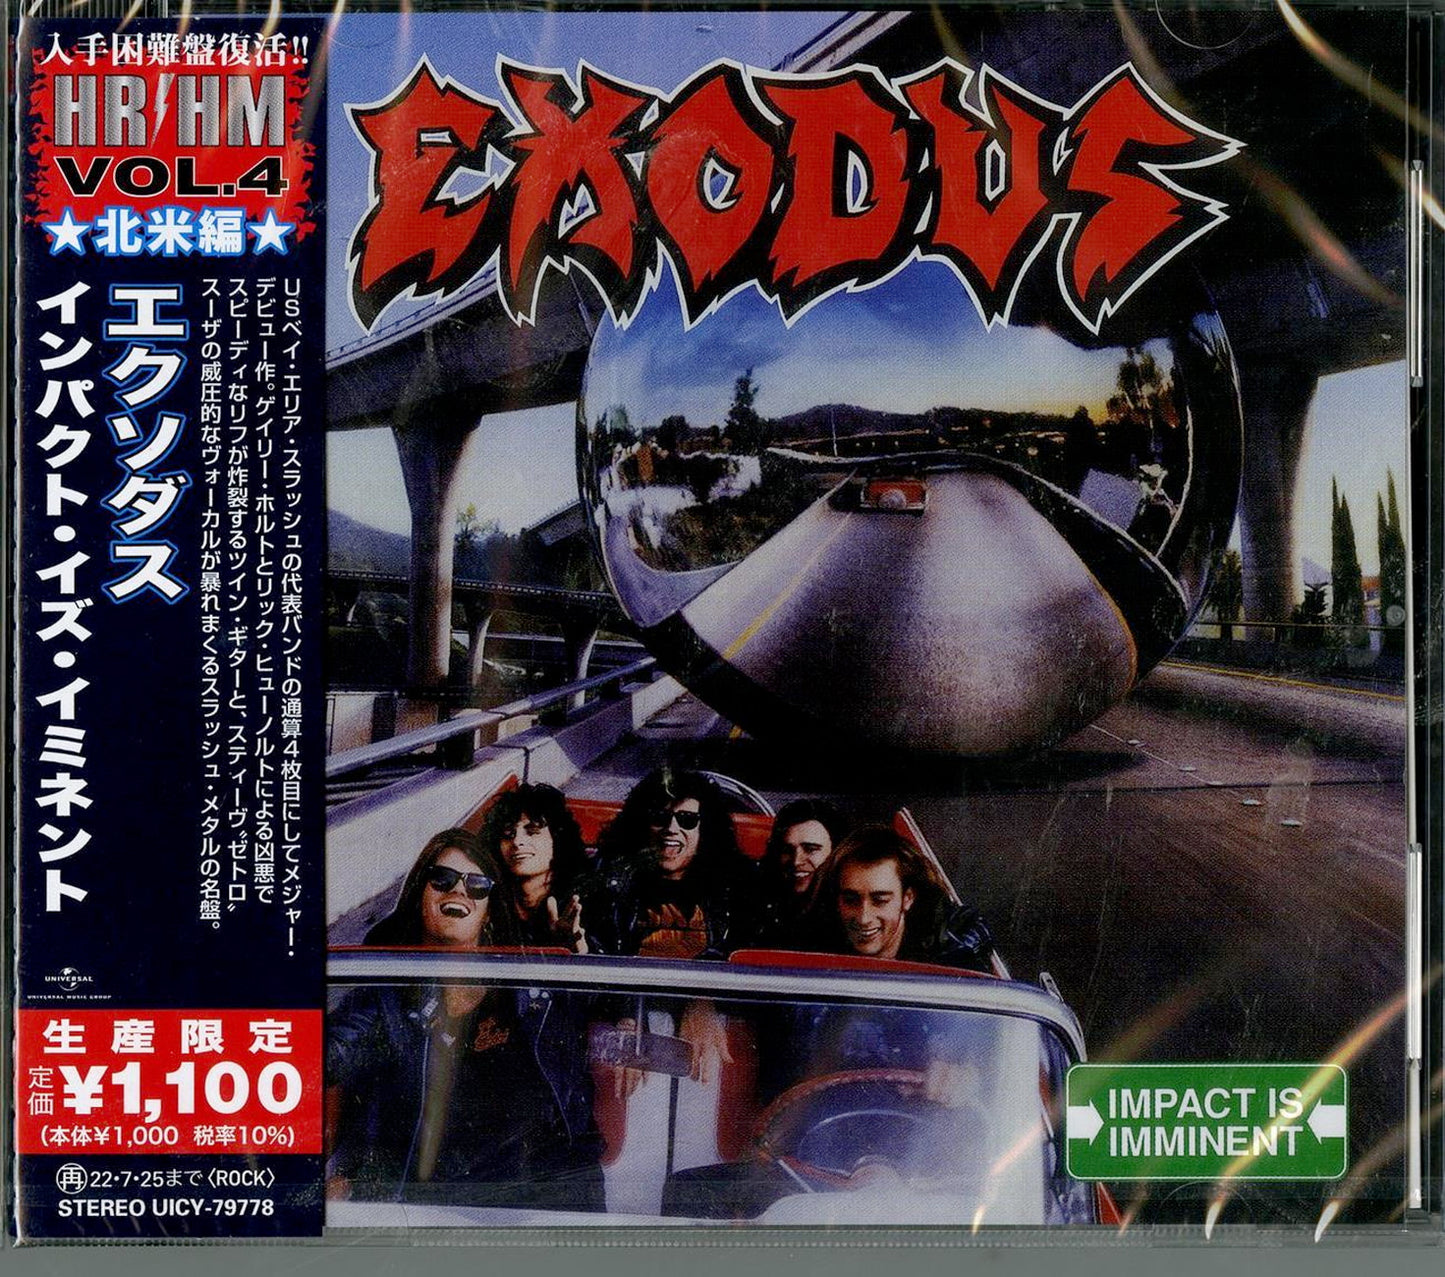 Exodus - Impact Is Imminent - Japan  CD Limited Edition